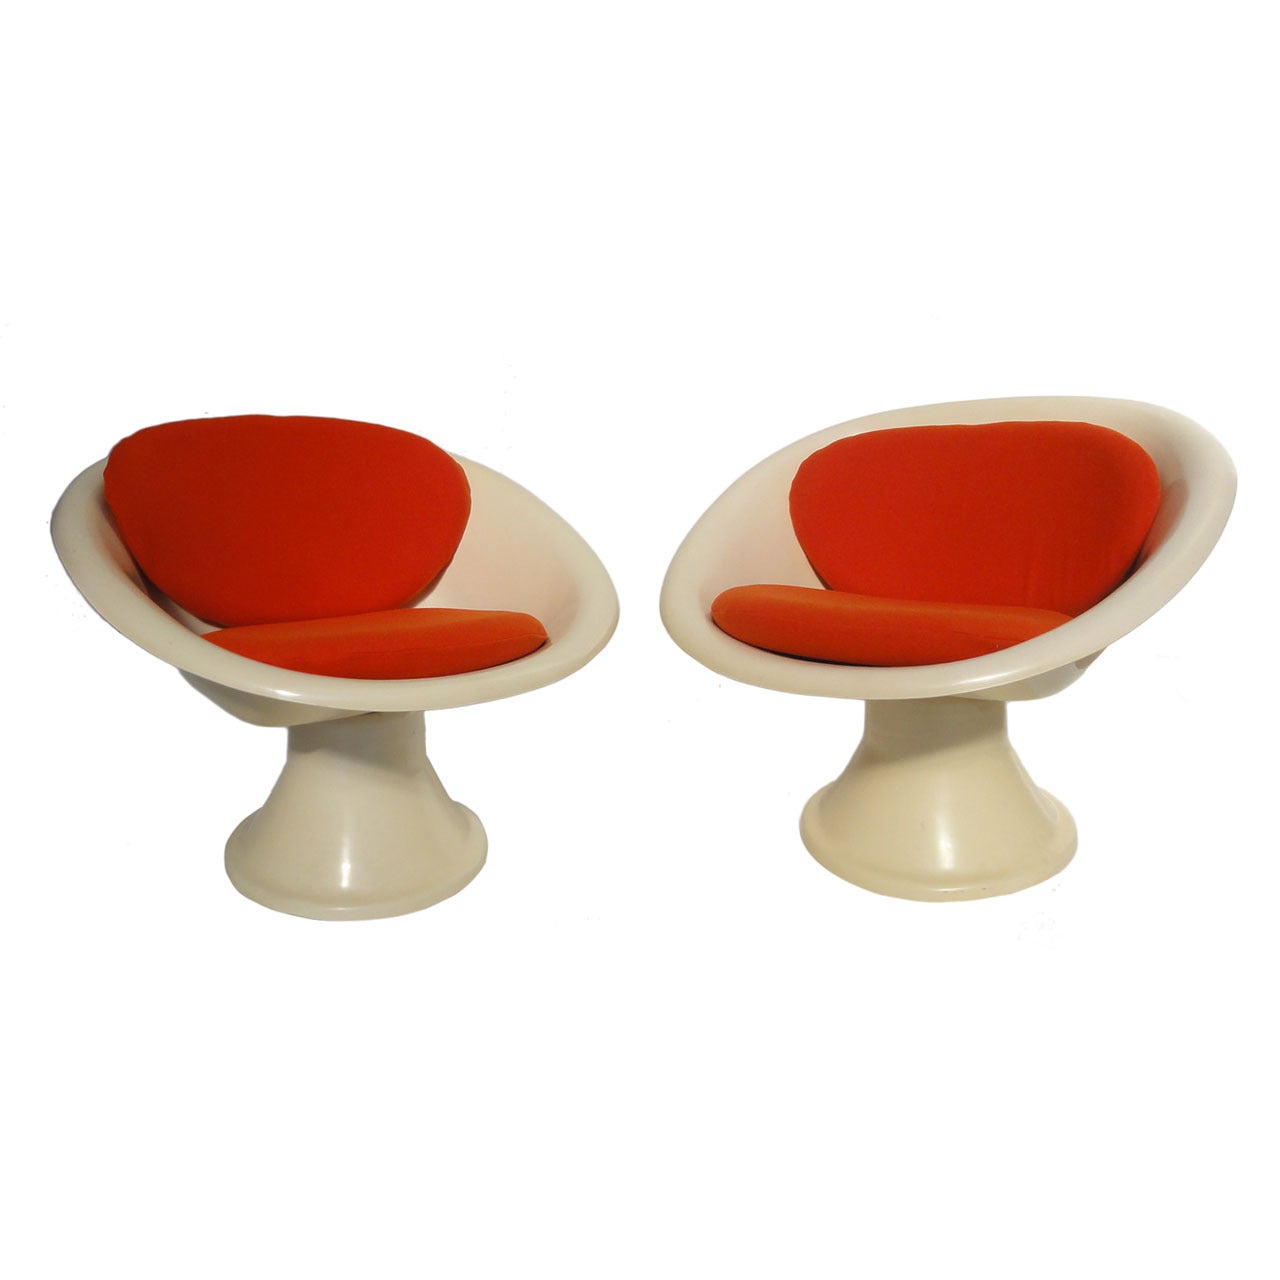 Super Rare 'Mecurio' Chairs by French Artist Claude Courtecuisse, Steiner, 1967 For Sale